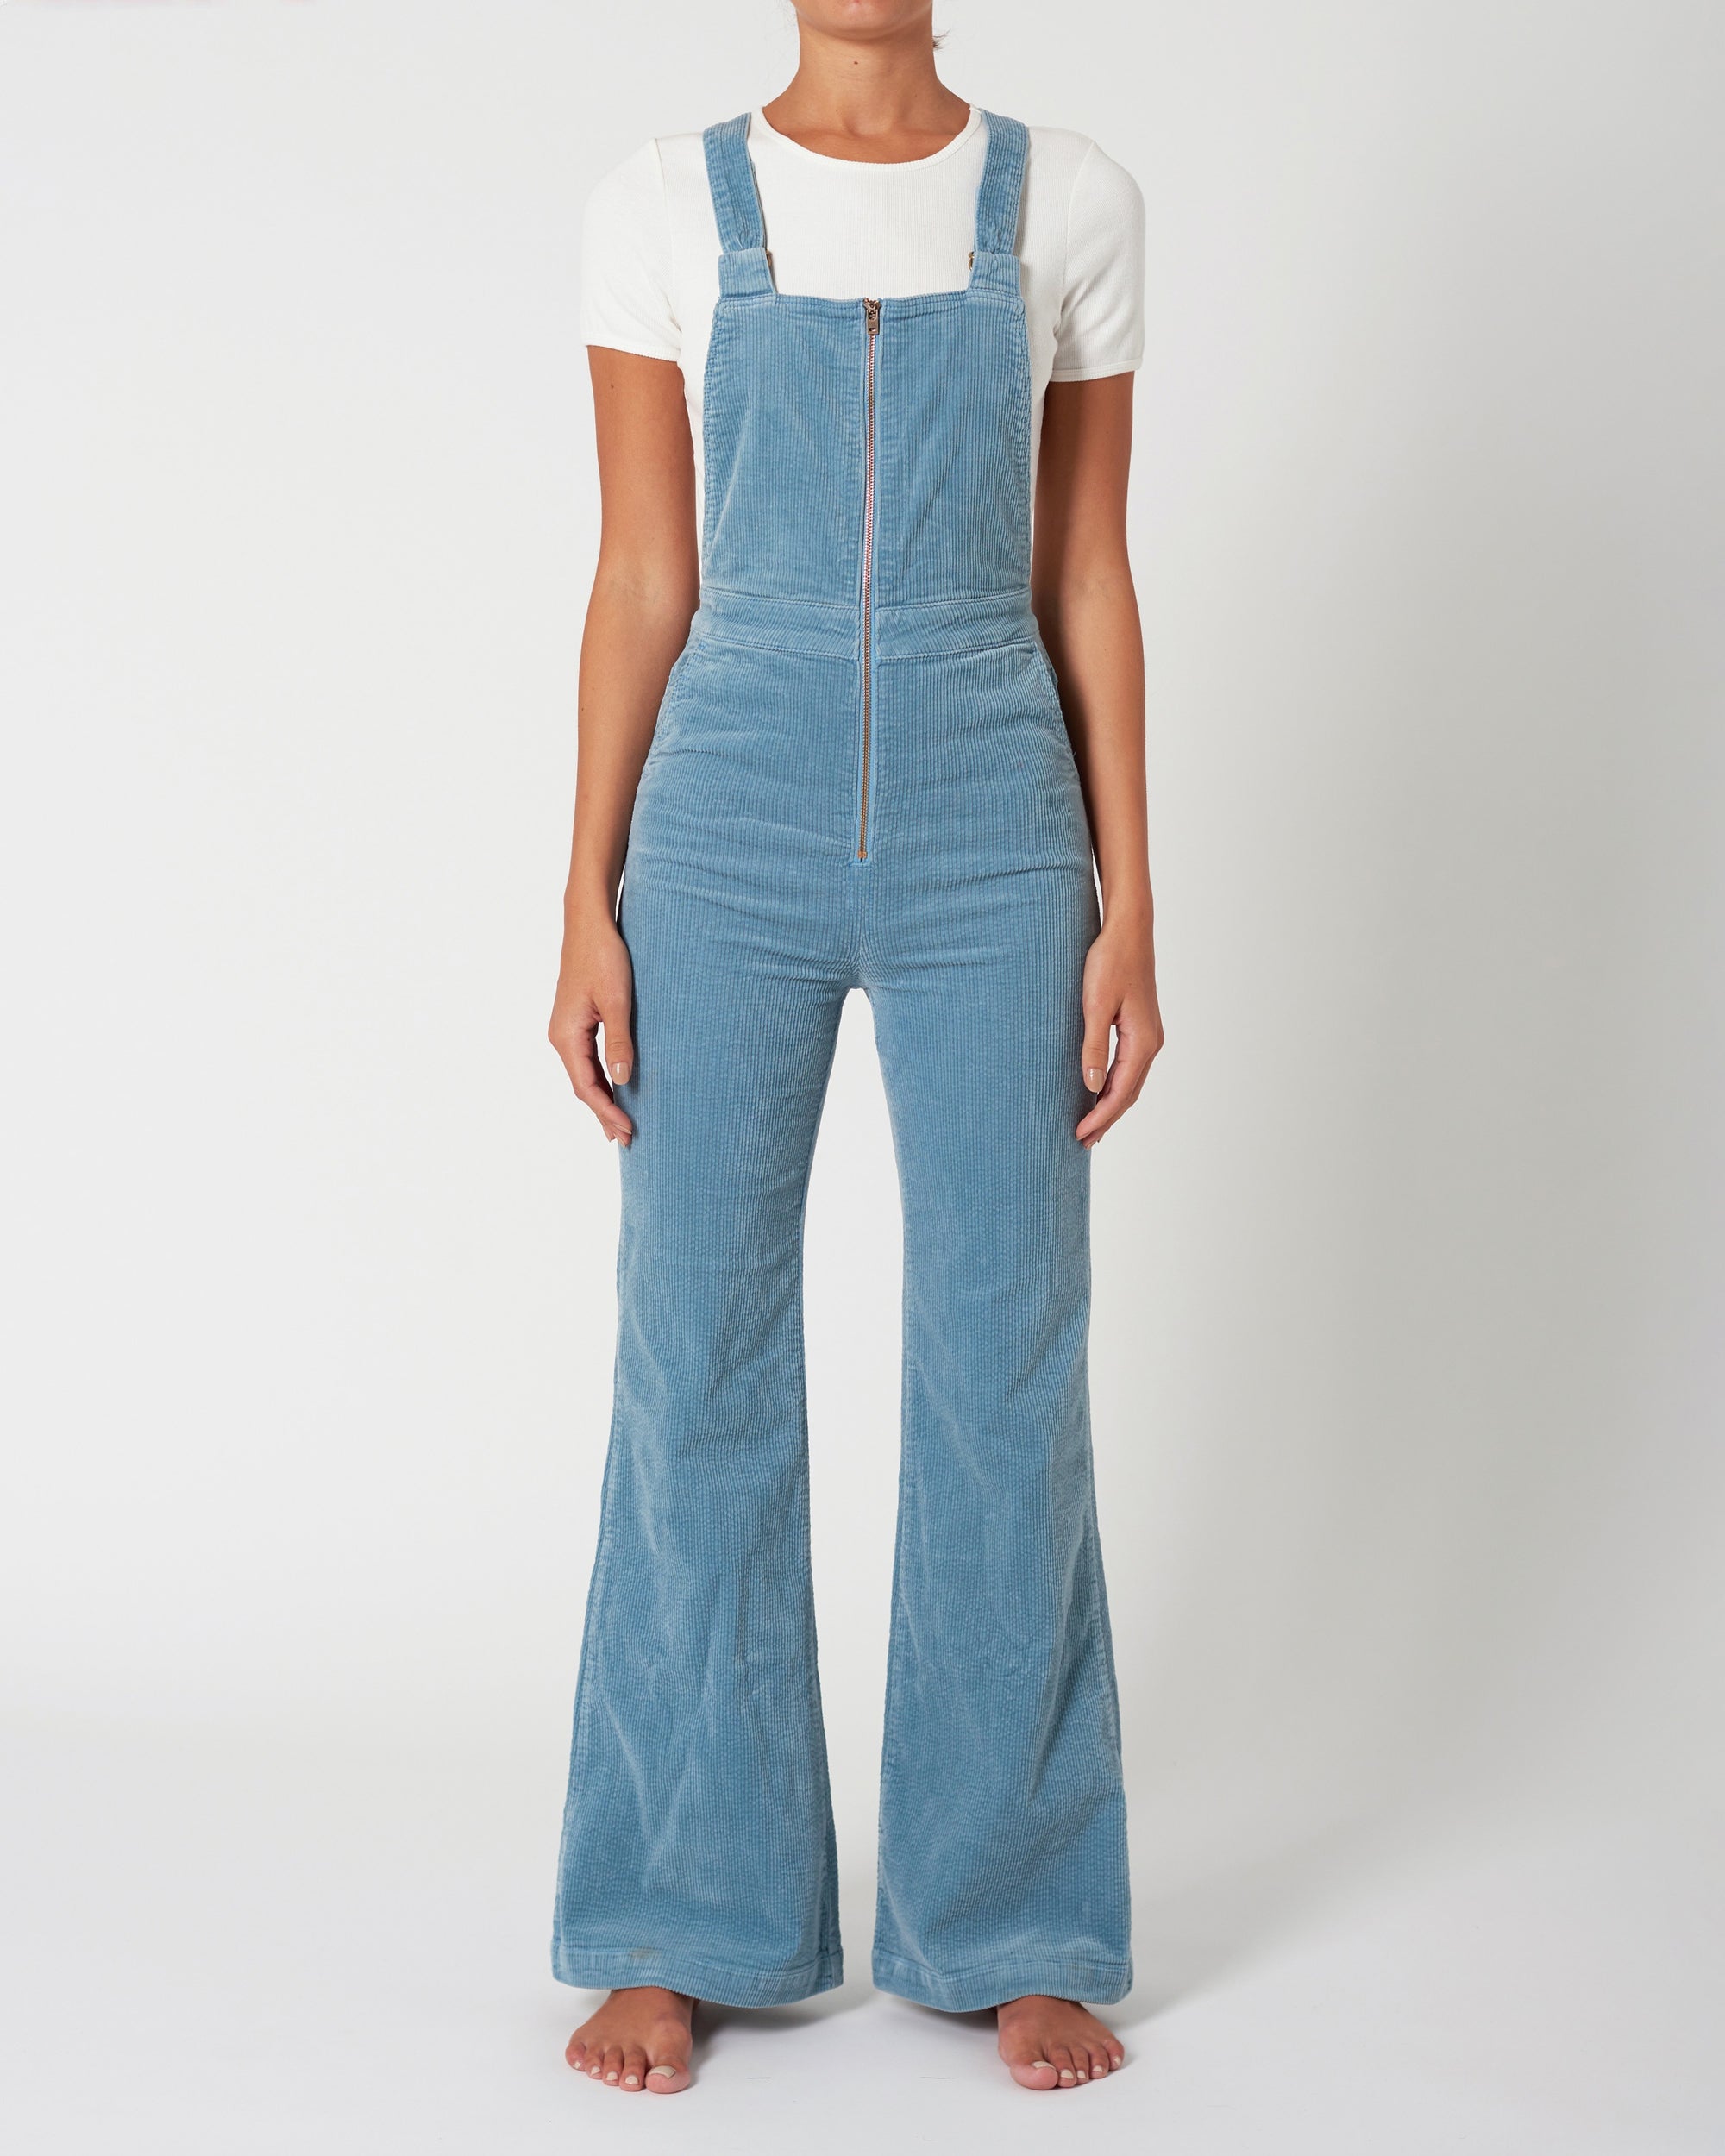 The Eastcoast Flare Cord Overall by Rolla&#39;s